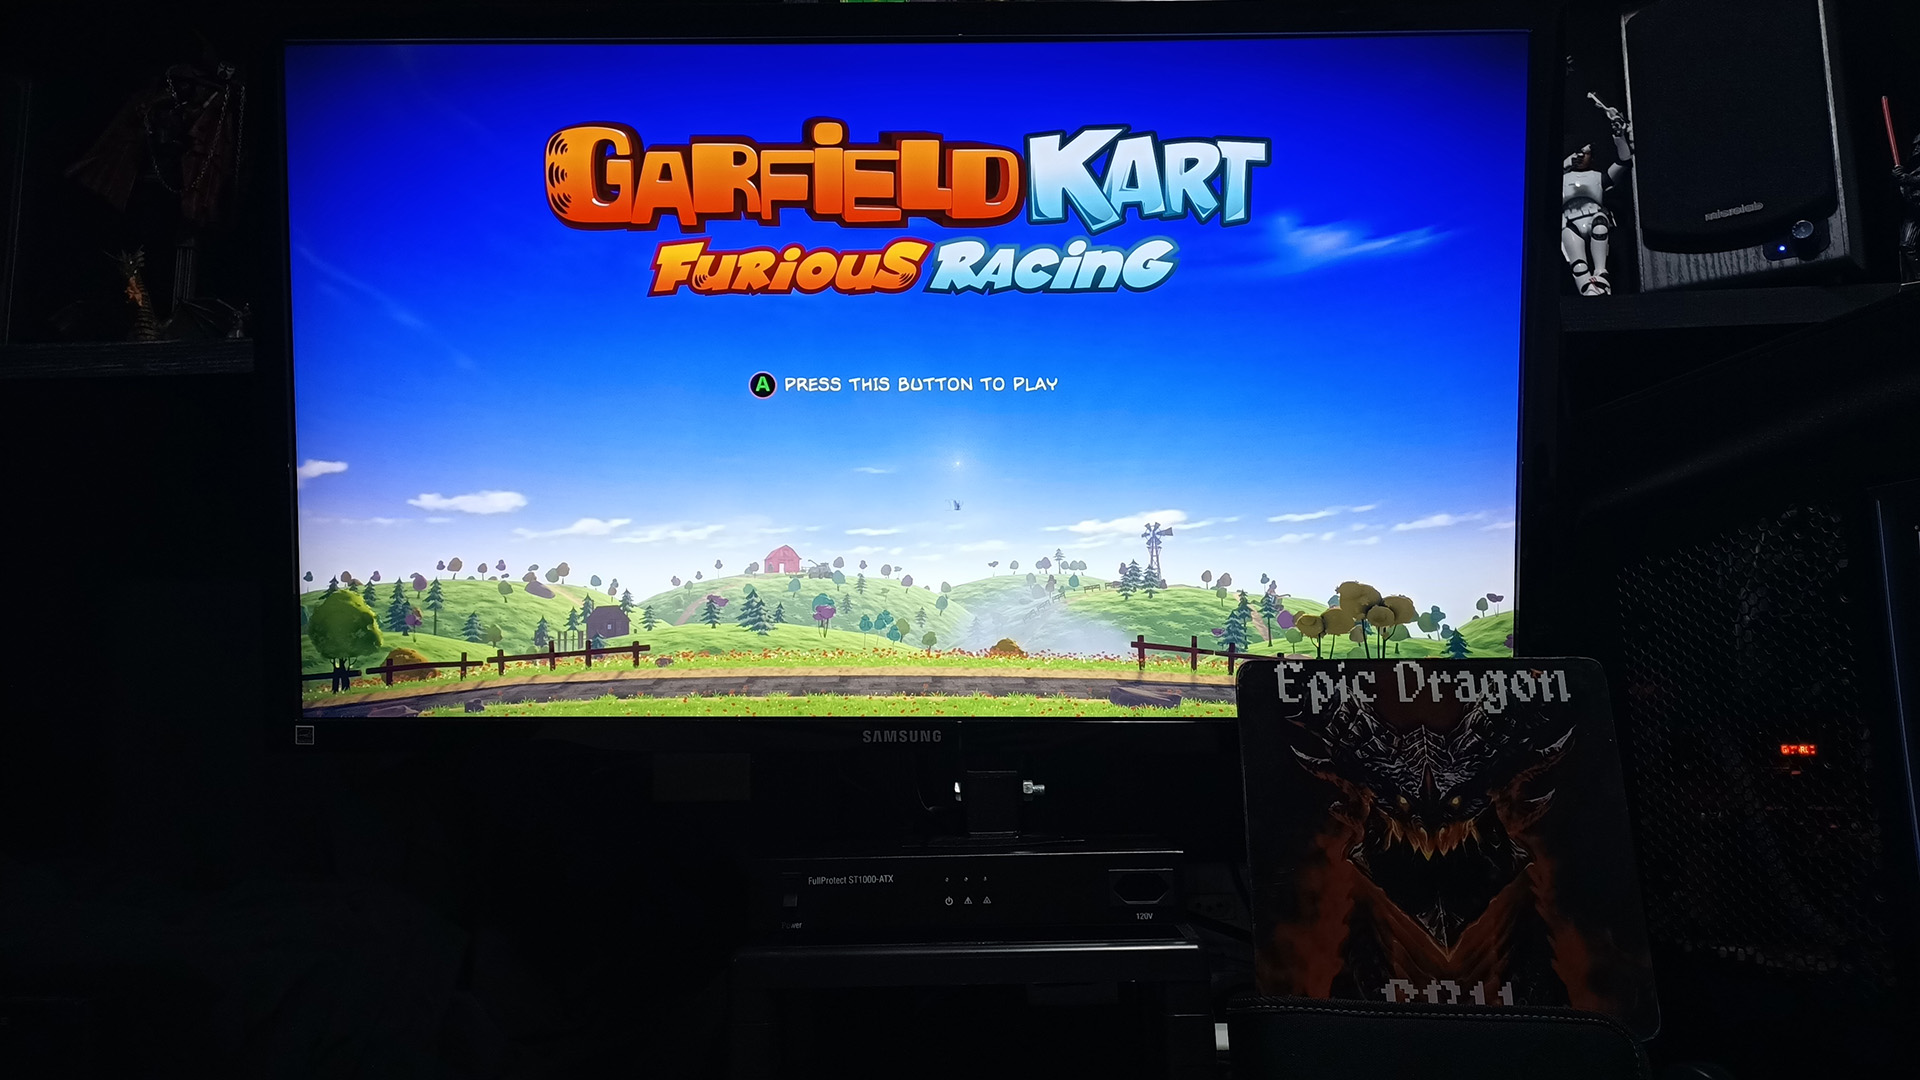 Garfield Kart Furious Racing: City Slicker [Time Trial: 3 Laps] time of 0:02:08.238